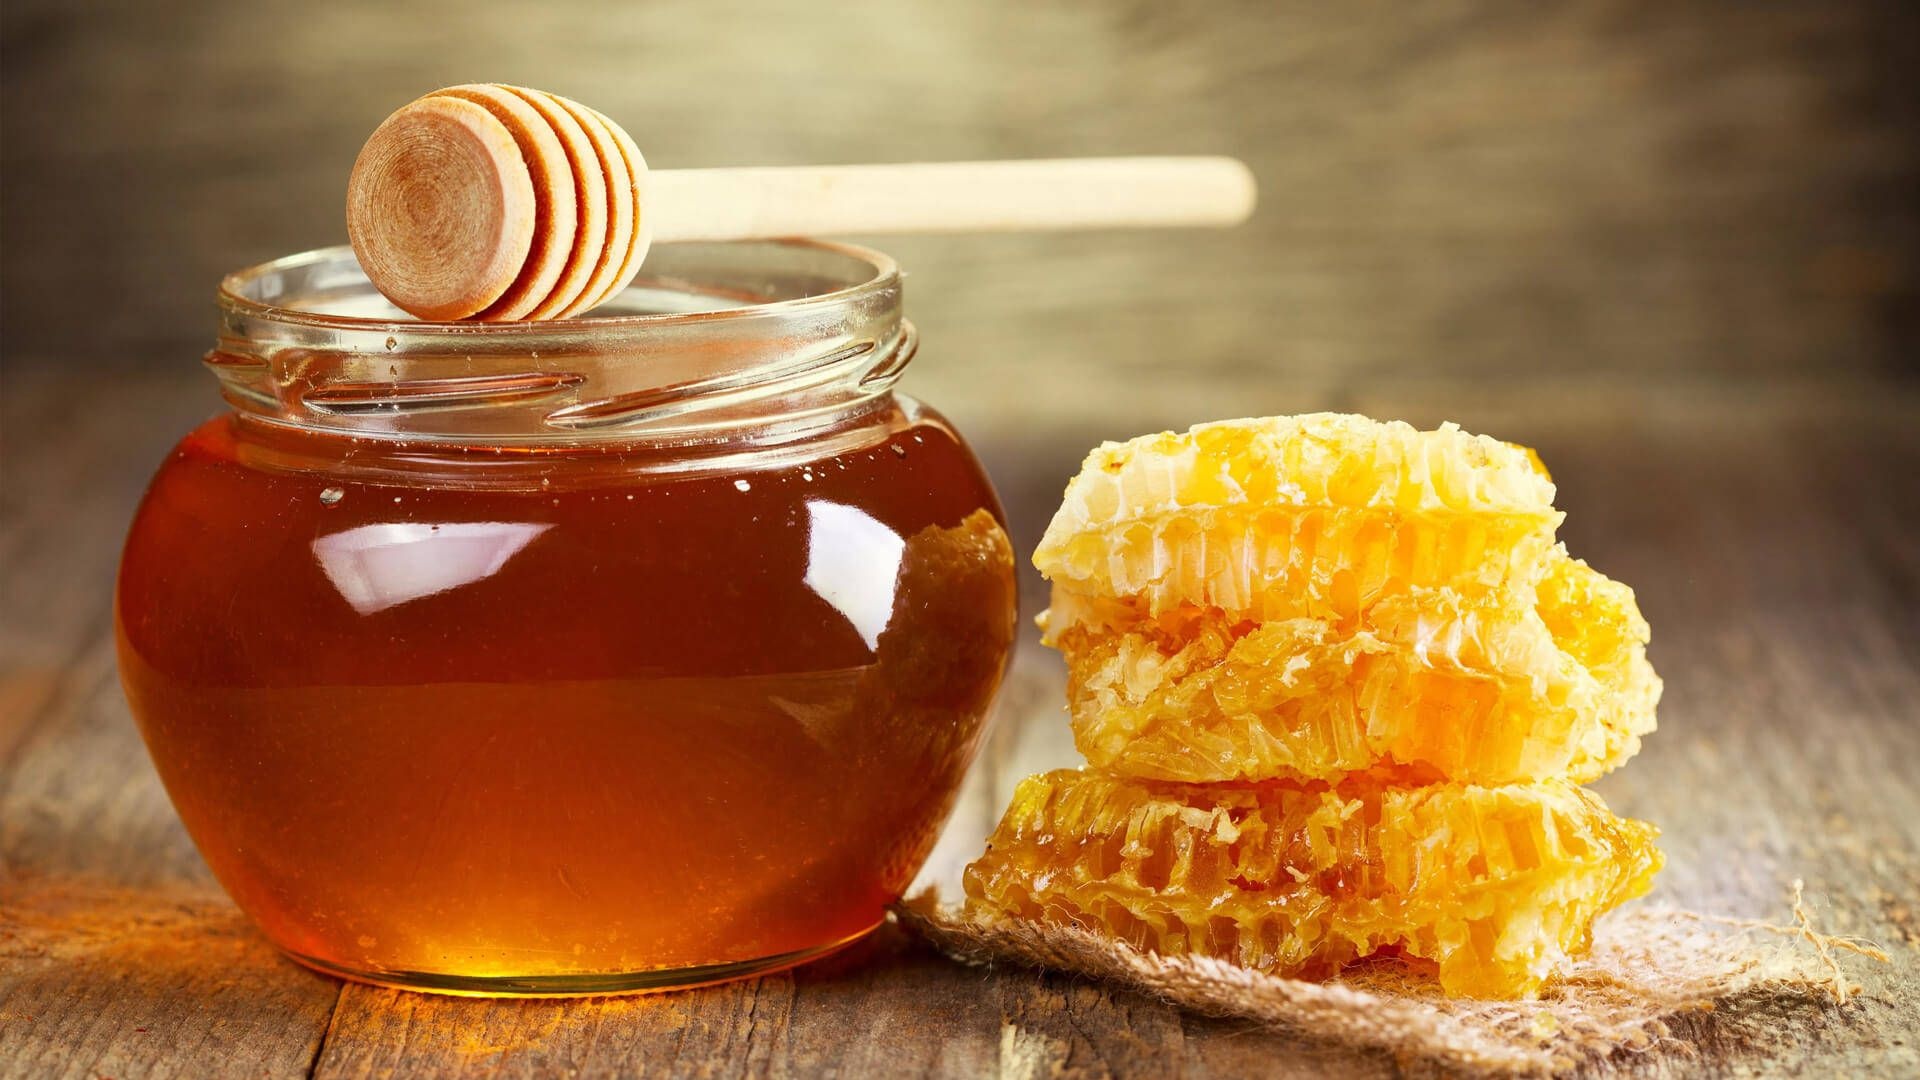 Honey: Stored in the beehive or nest in a honeycomb. 1920x1080 Full HD Wallpaper.